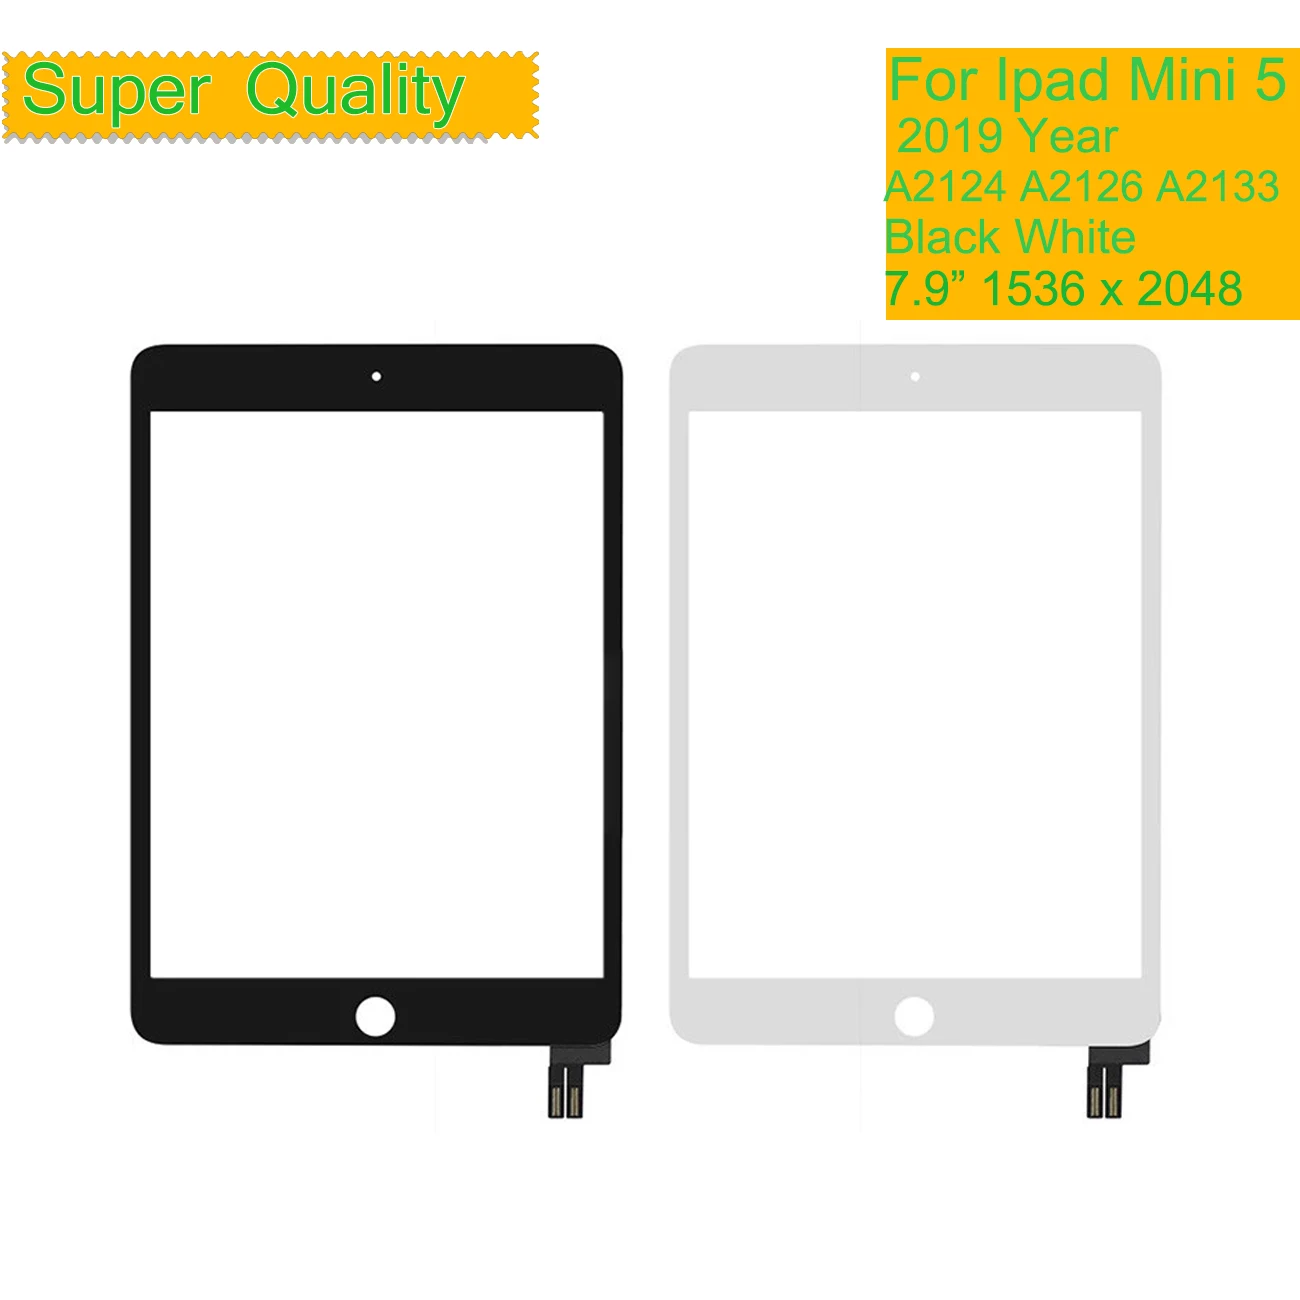 10Pcs/Lot For Apple iPad Mini 5 Touch Screen Digitizer Panel For iPad Mini 5 2019 A2124 A2126 A2133 LCD Front Outer Glass Sensor 4 5 for huawei ascend y550 lcd touch screen digitizer sensor outer glass lens panel replacement